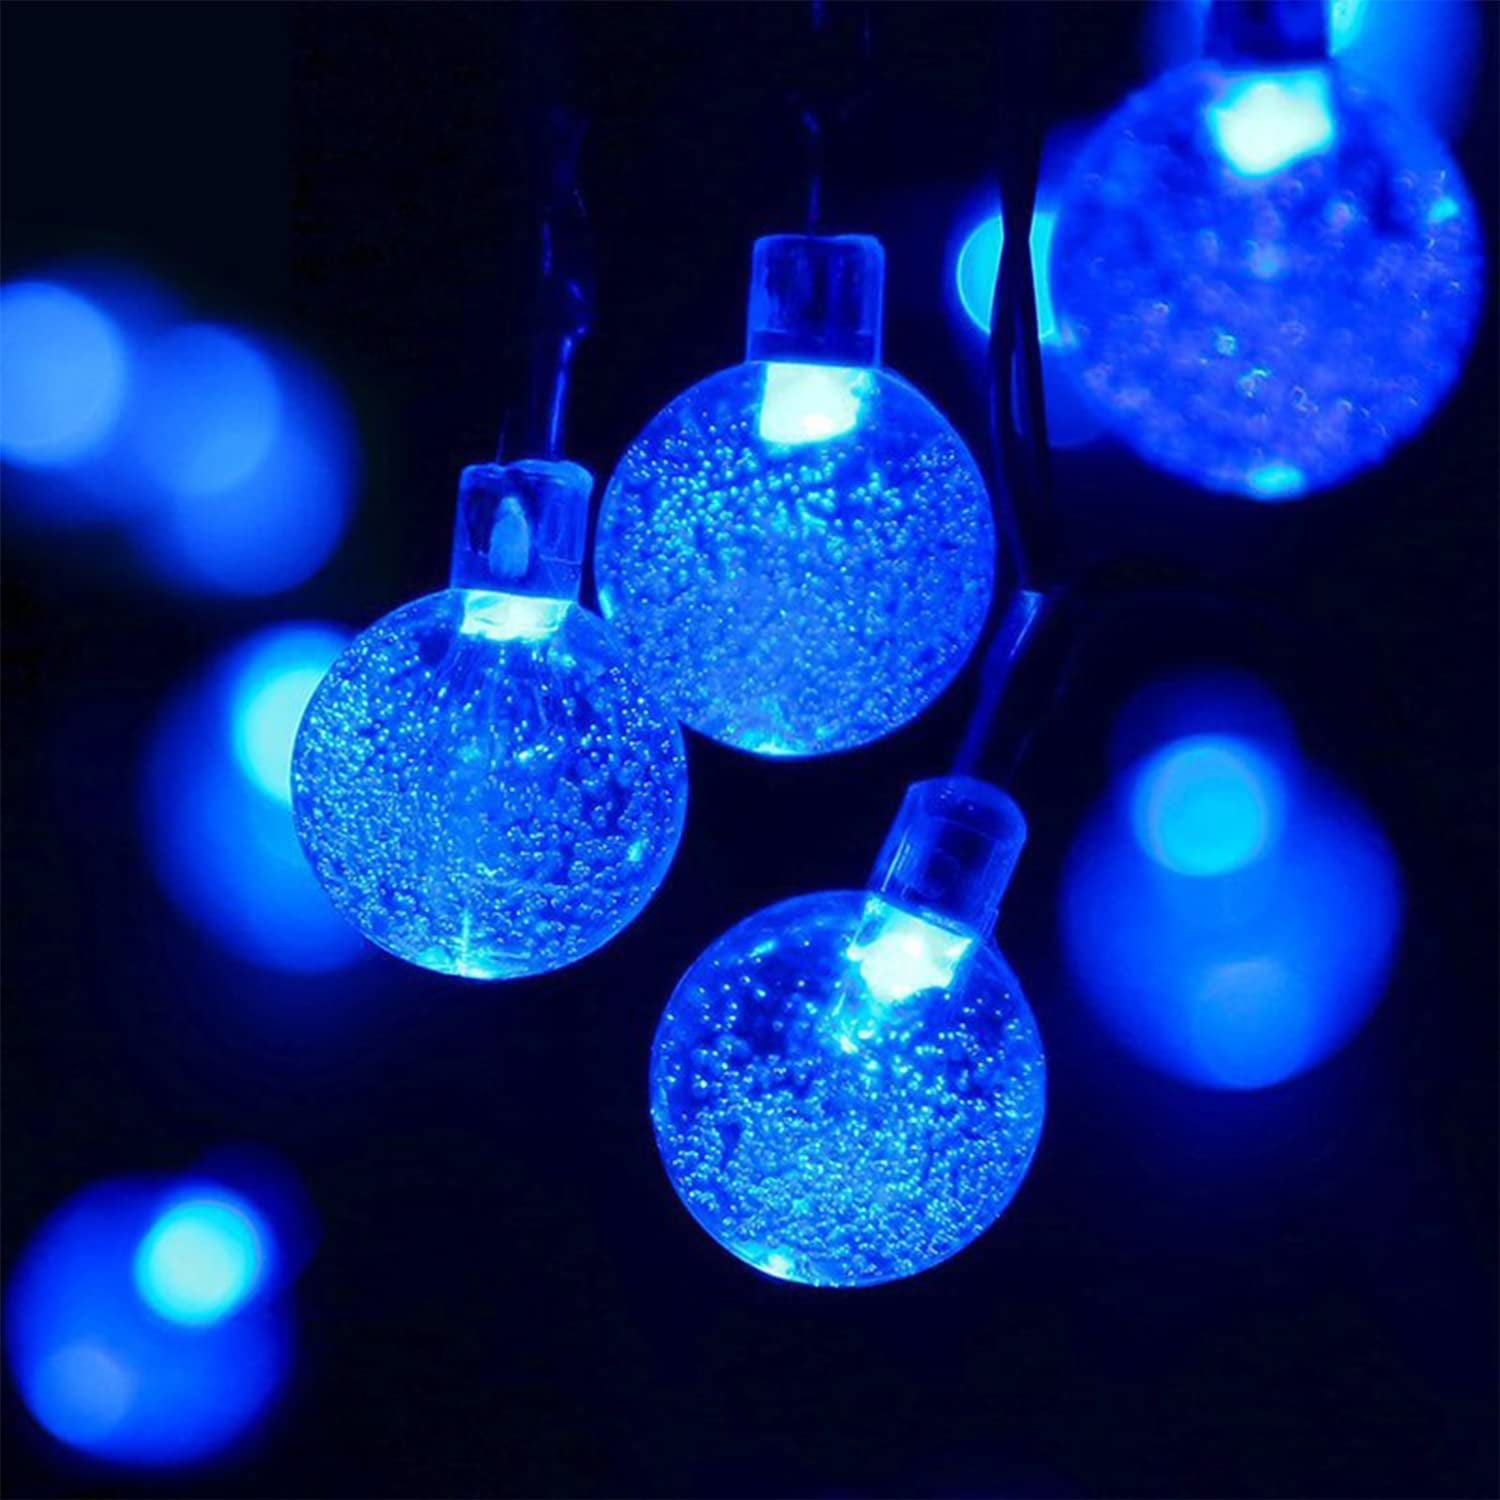 GooingTop Solar Outdoor String Lights Waterproof,30 FT 60LED Crystal Globe  Outside Solar Fairy Twinkle Lights for Garden Yard Pathway Patio Tree Landscape  Lighting Decorative,Blue